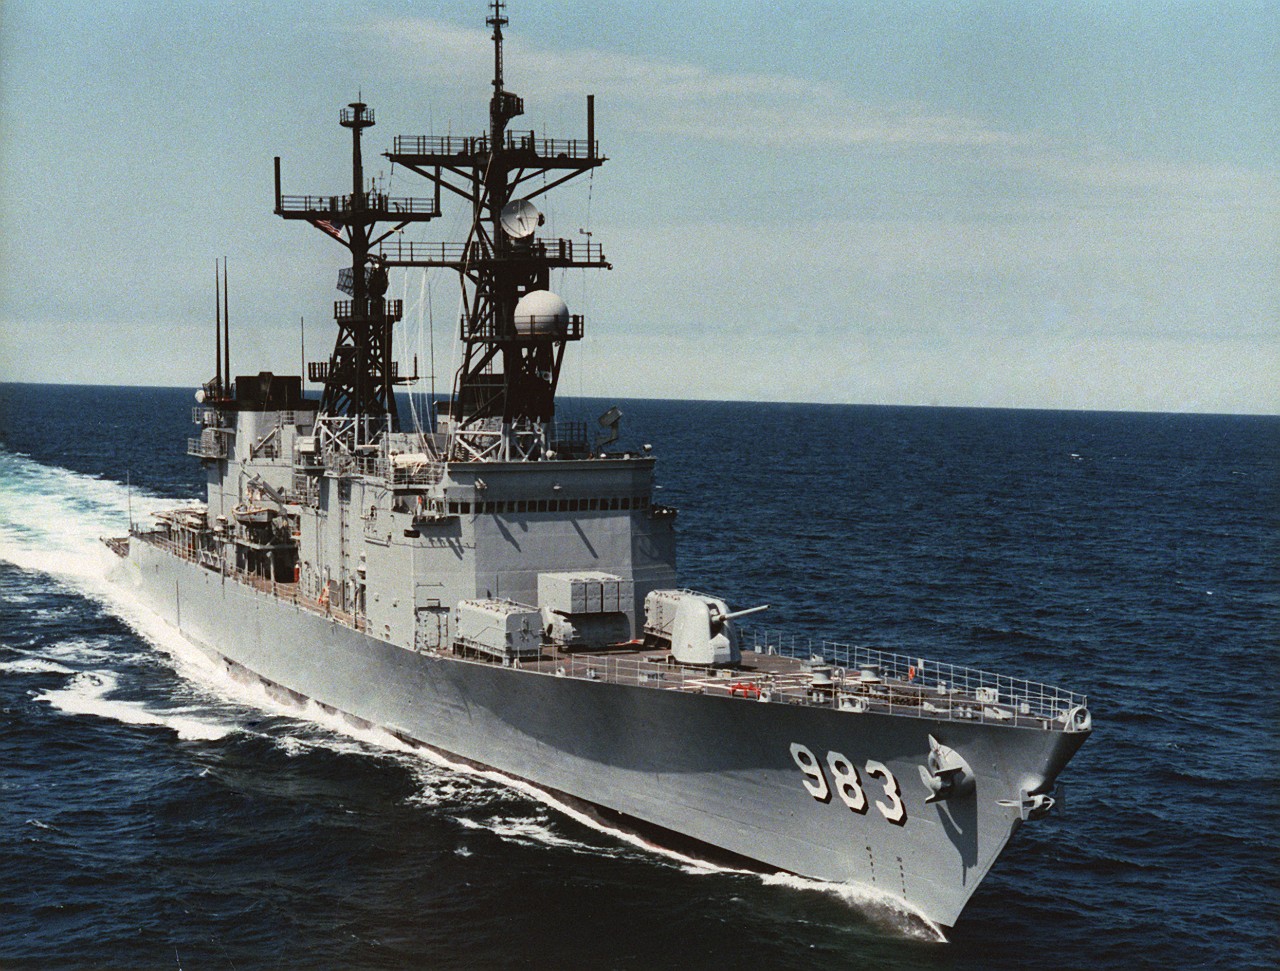 John Rodgers (DD-983) underway in the Gulf of Mexico during sea trials, 7 March 1985. (U.S. Navy Photograph SC-86-00300, National Archives and Records Administration, Still Pictures Division, College Park, Md.) 